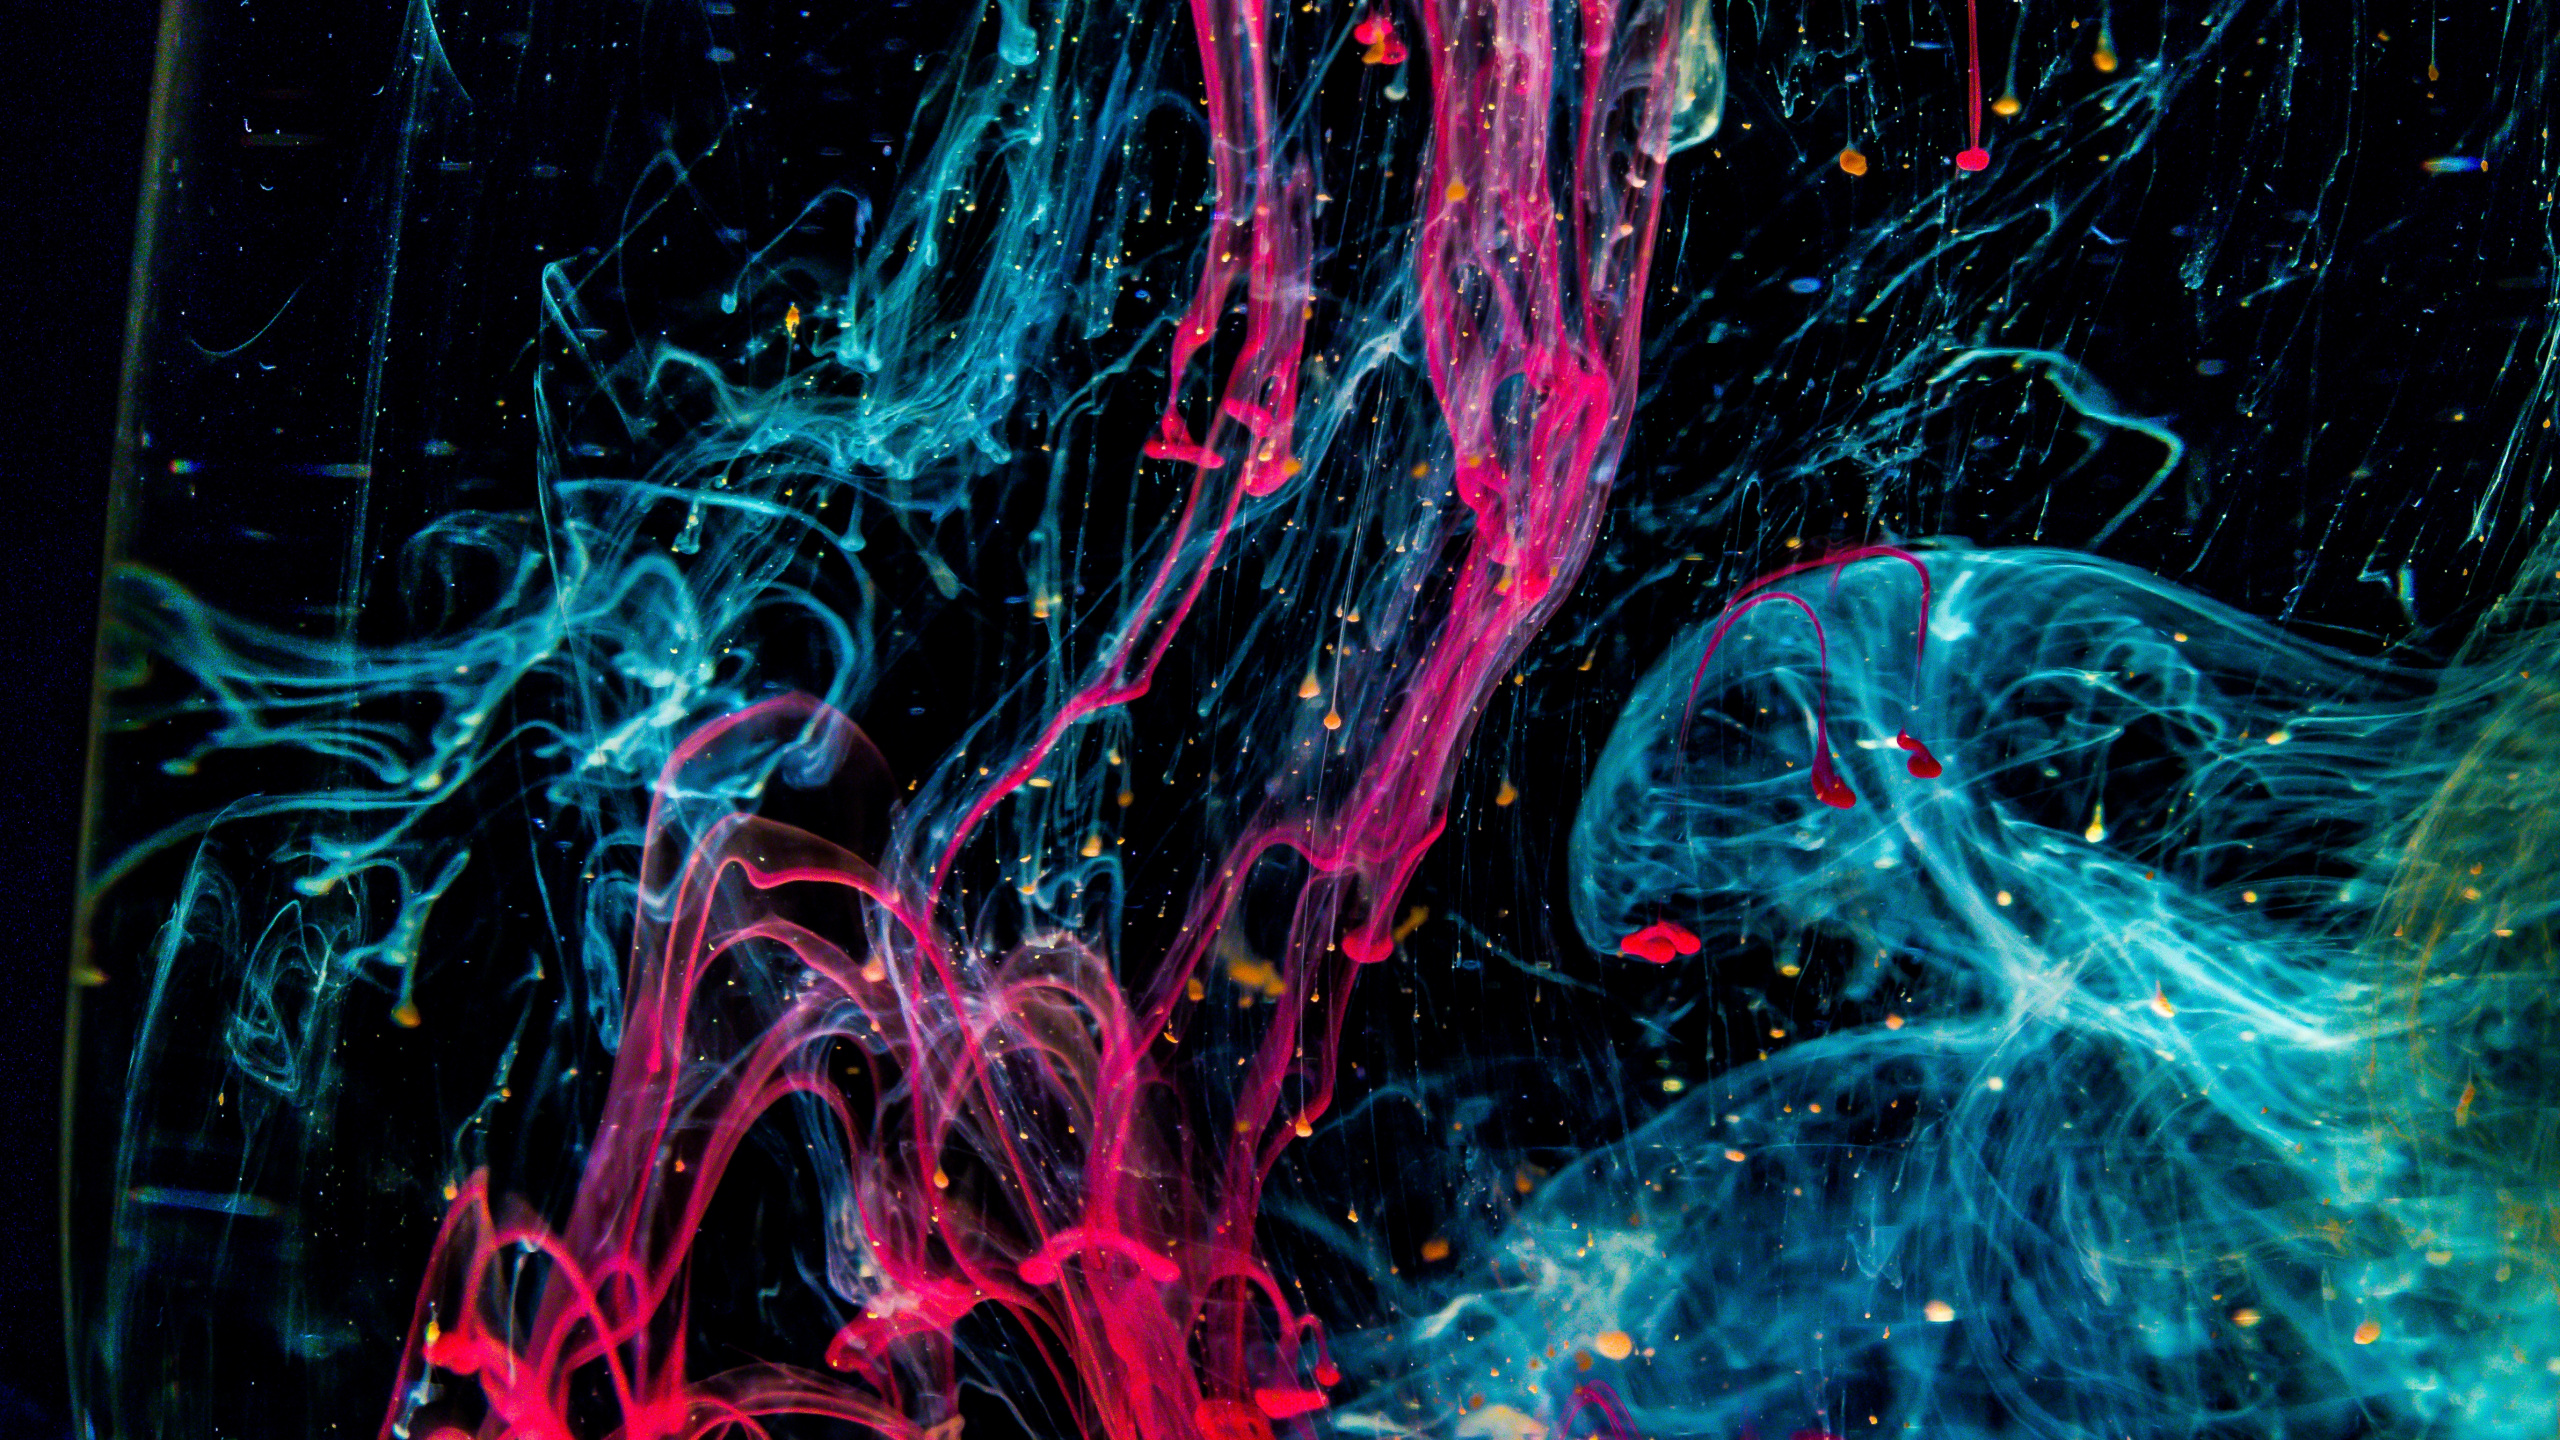 Blue and Red Abstract Painting. Wallpaper in 2560x1440 Resolution